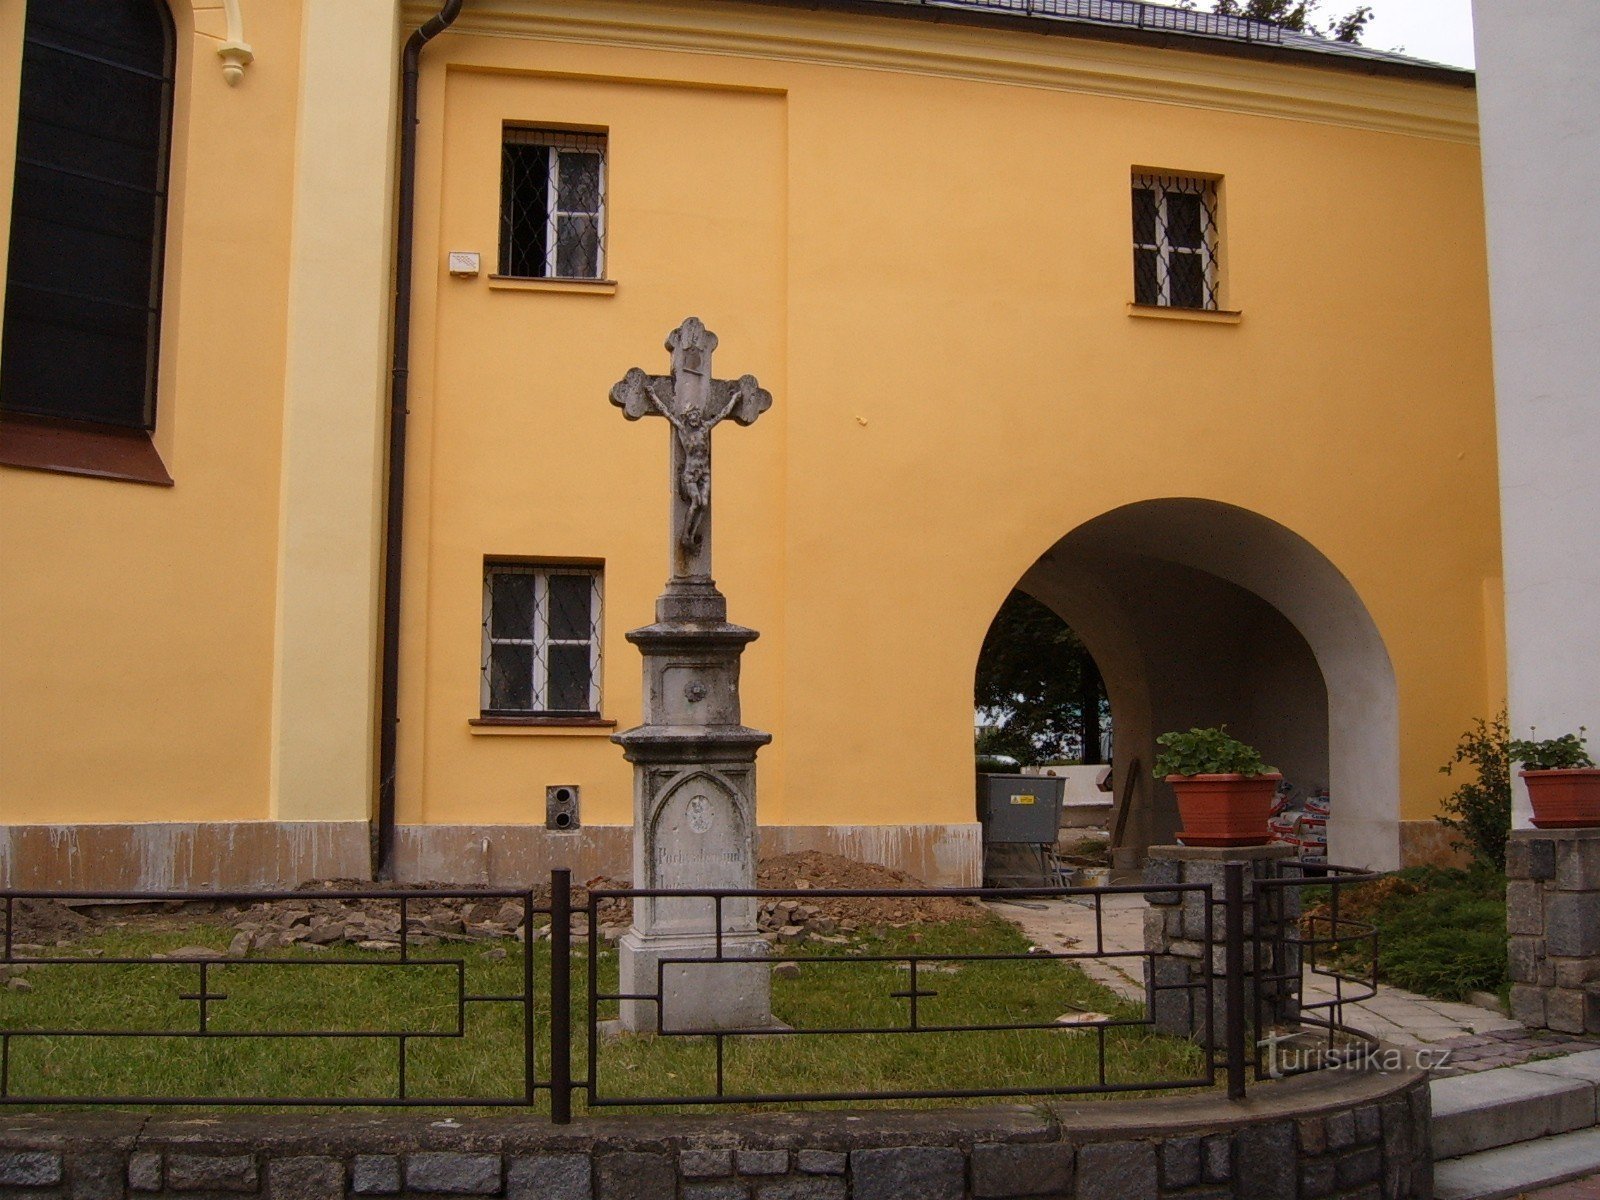 Pilgrimage Church of the Assumption of the Virgin Mary in Hrabyni